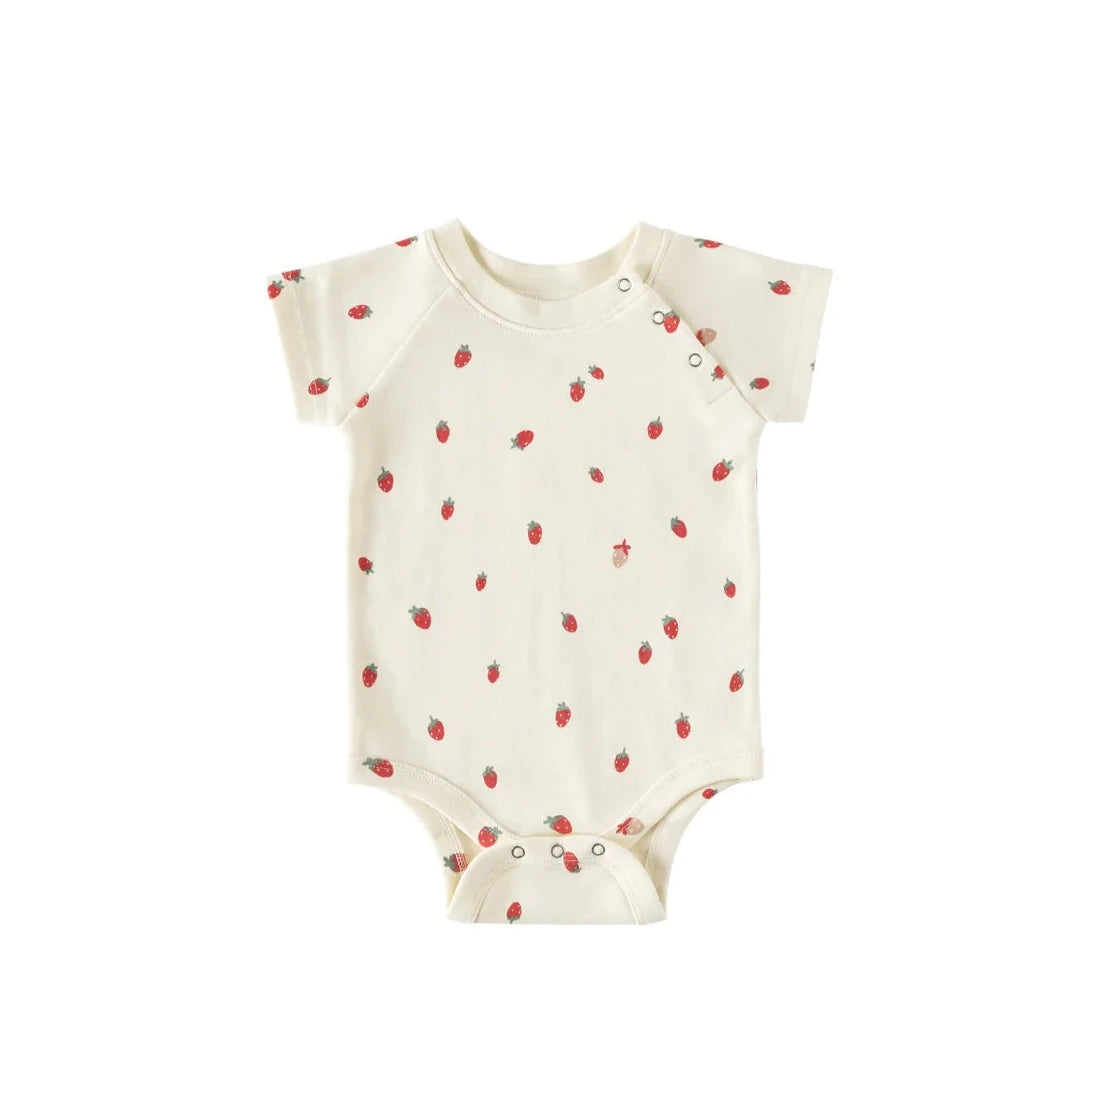 white onesie with buttons that snap on the front. has red strawberries printed all over it